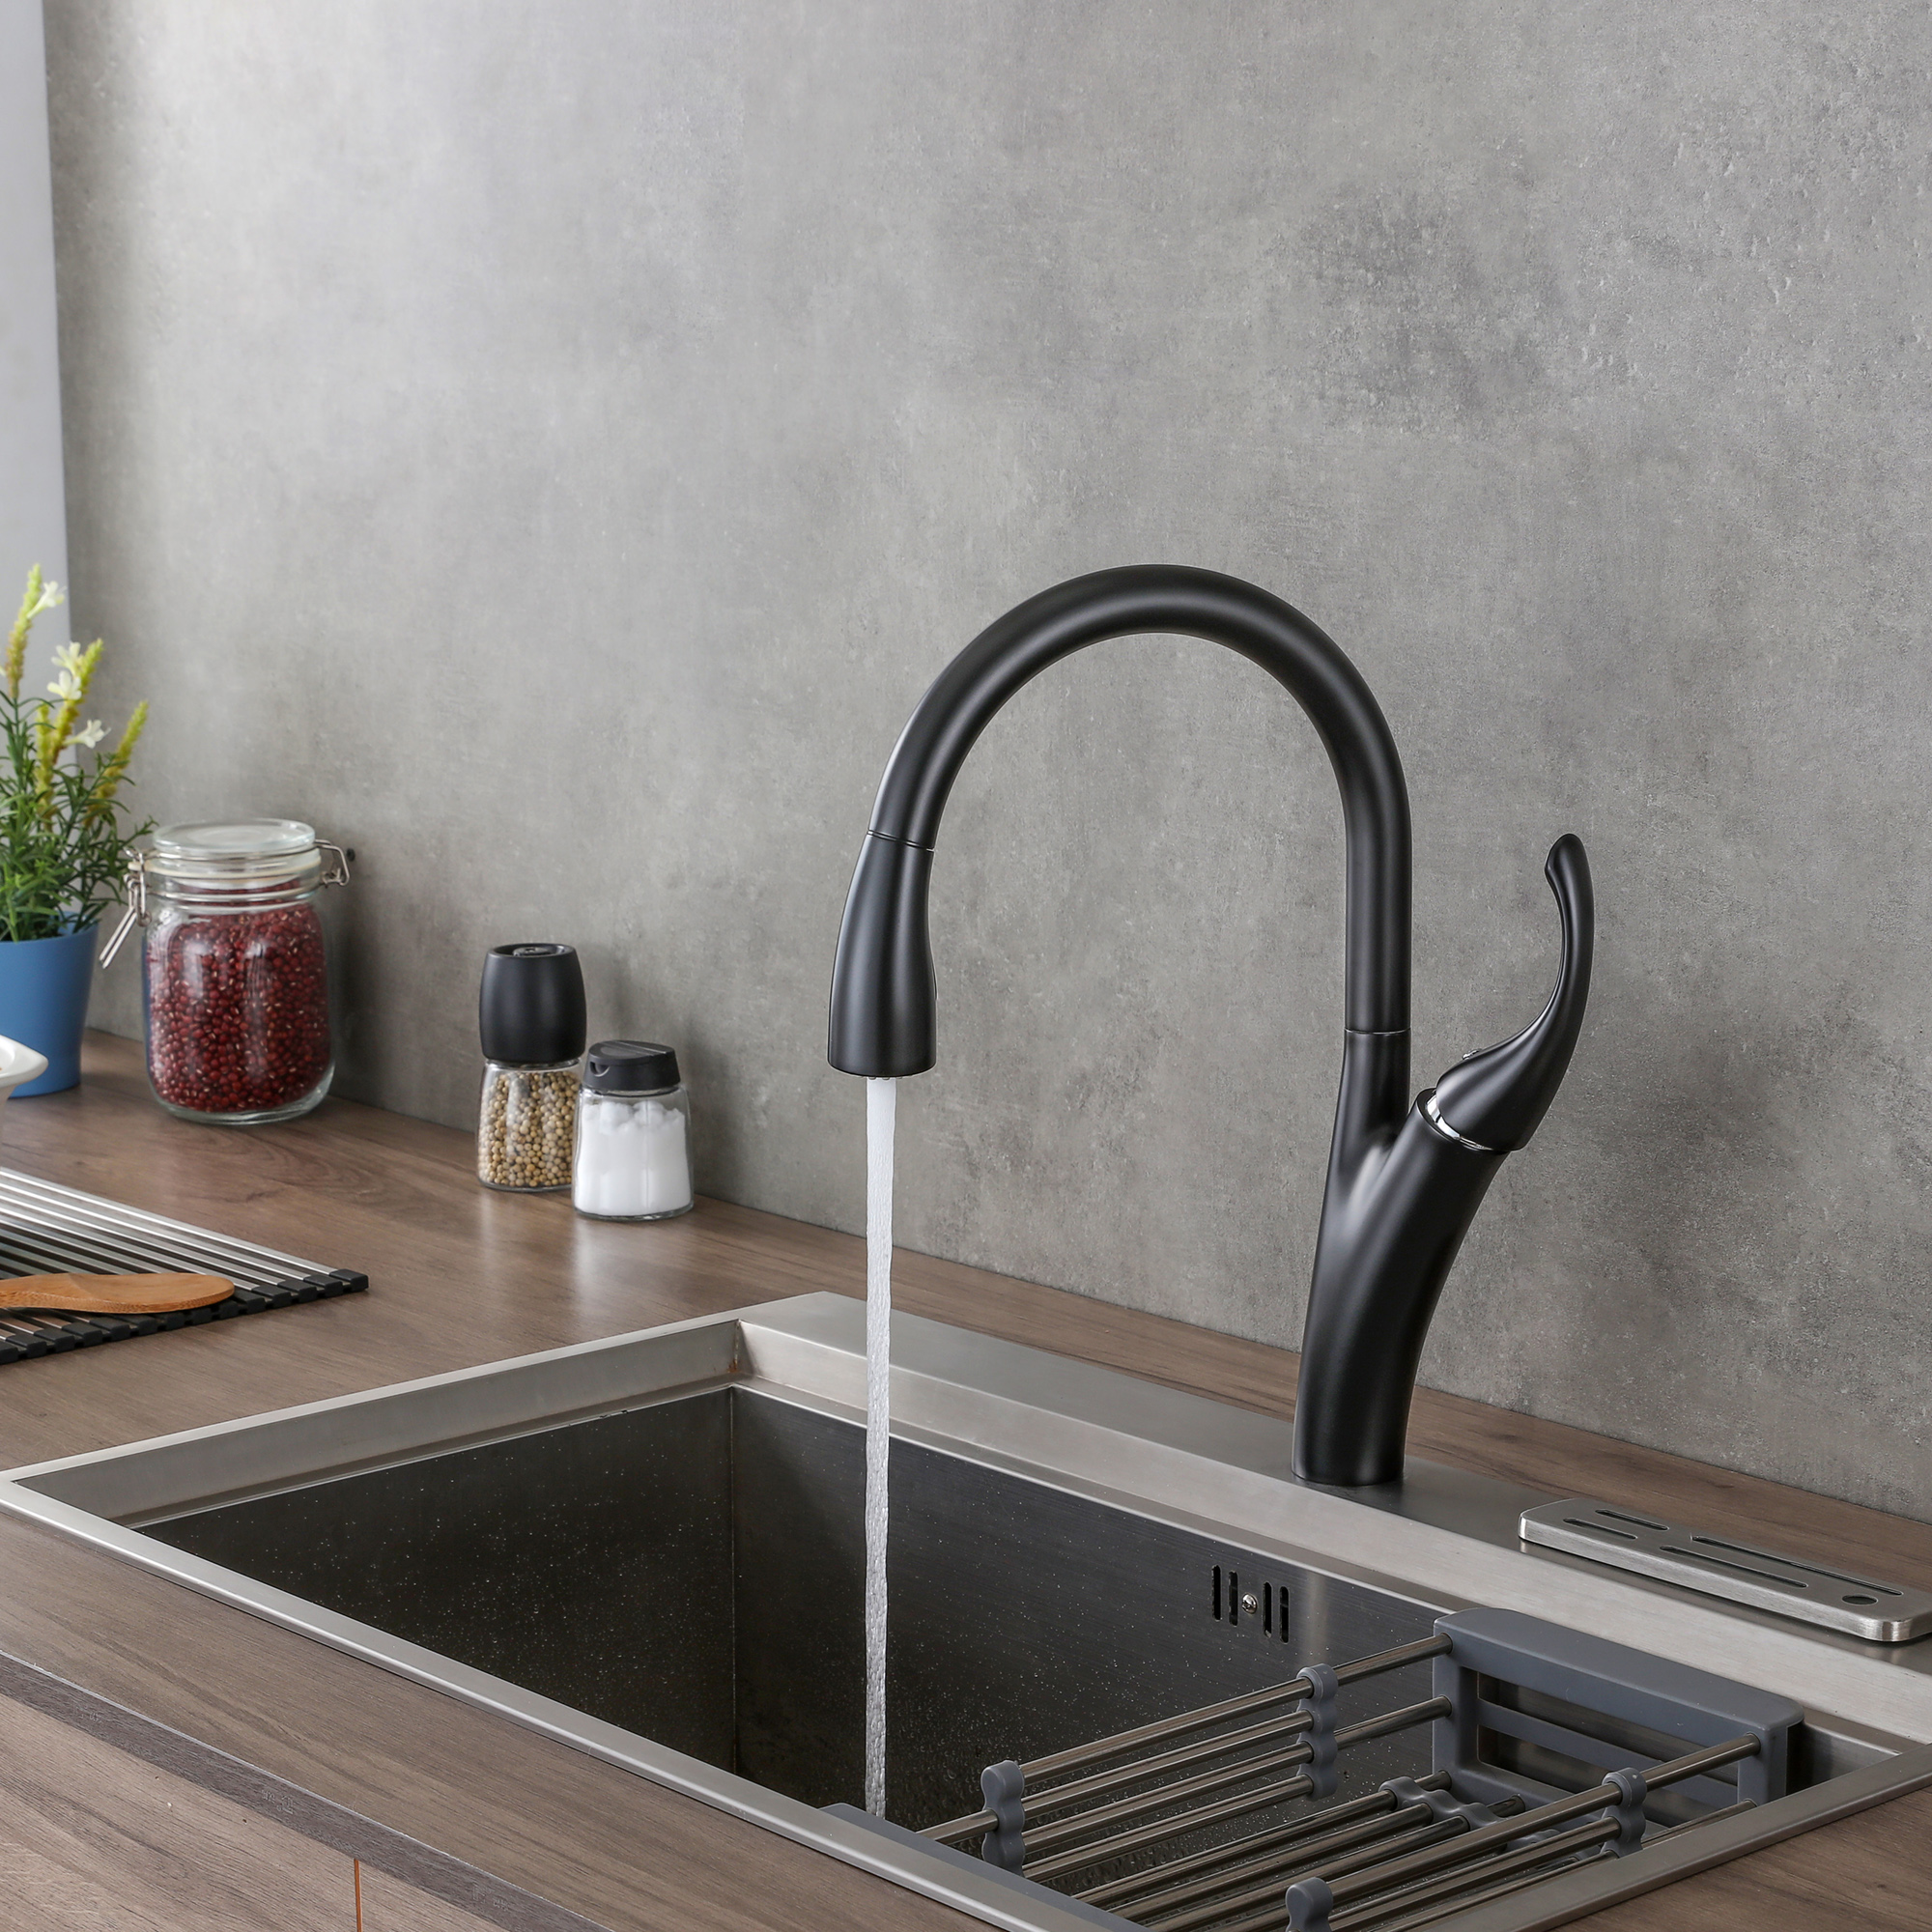 Swan Neck New Design Matt Black Hot Sale Pull Down with Two Function Sprayer Kitchen Faucet